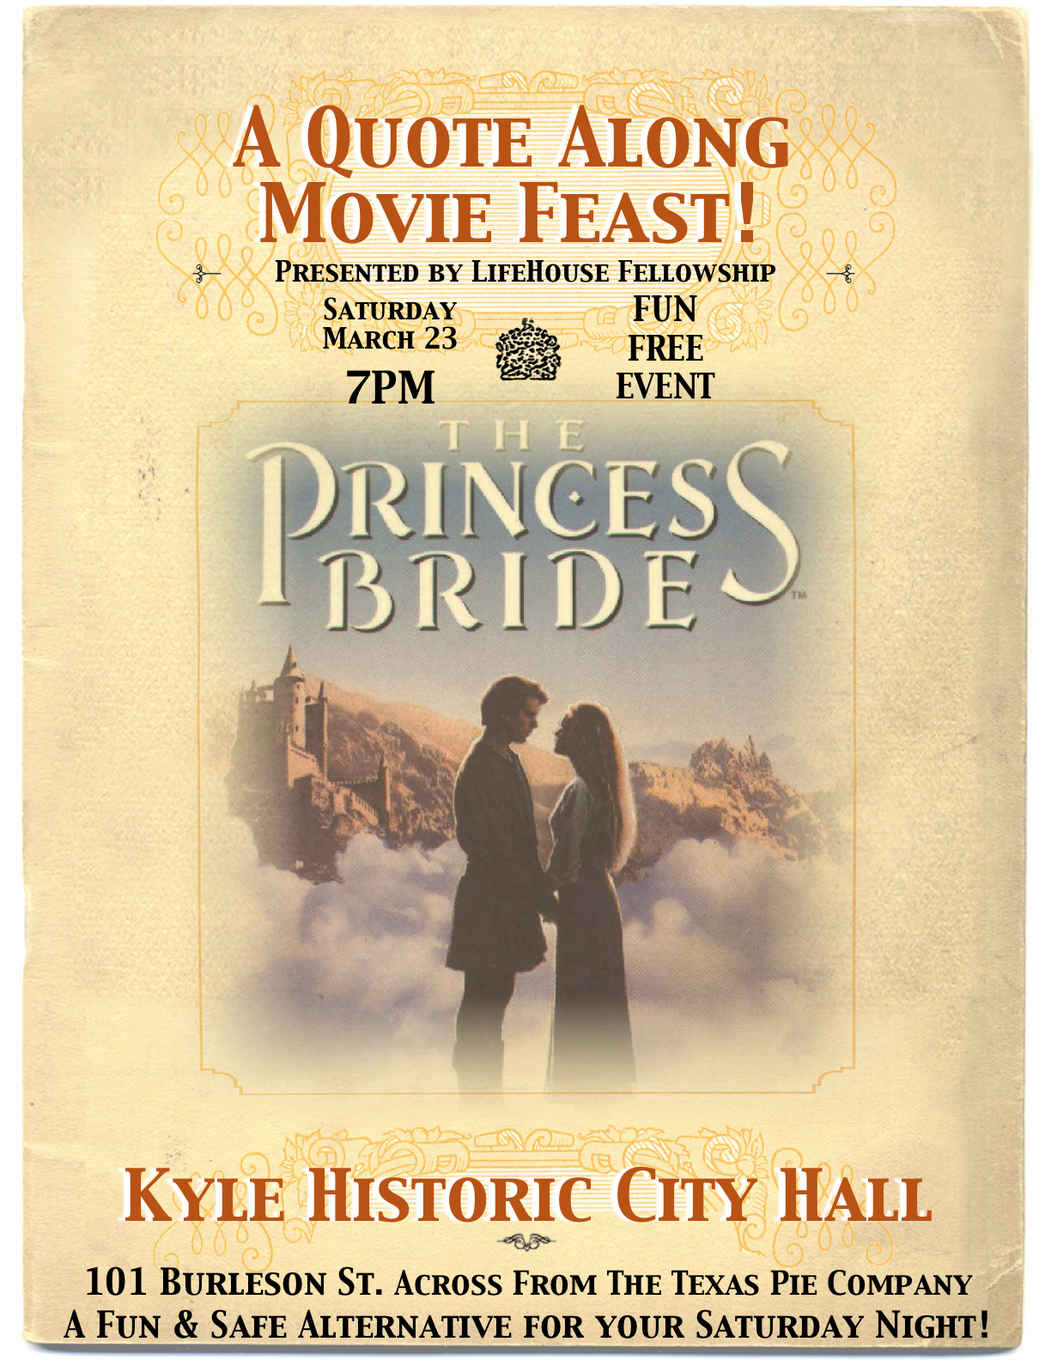 Life House Fellowship Presents: Quote Along Feast w/The Princess Bride!